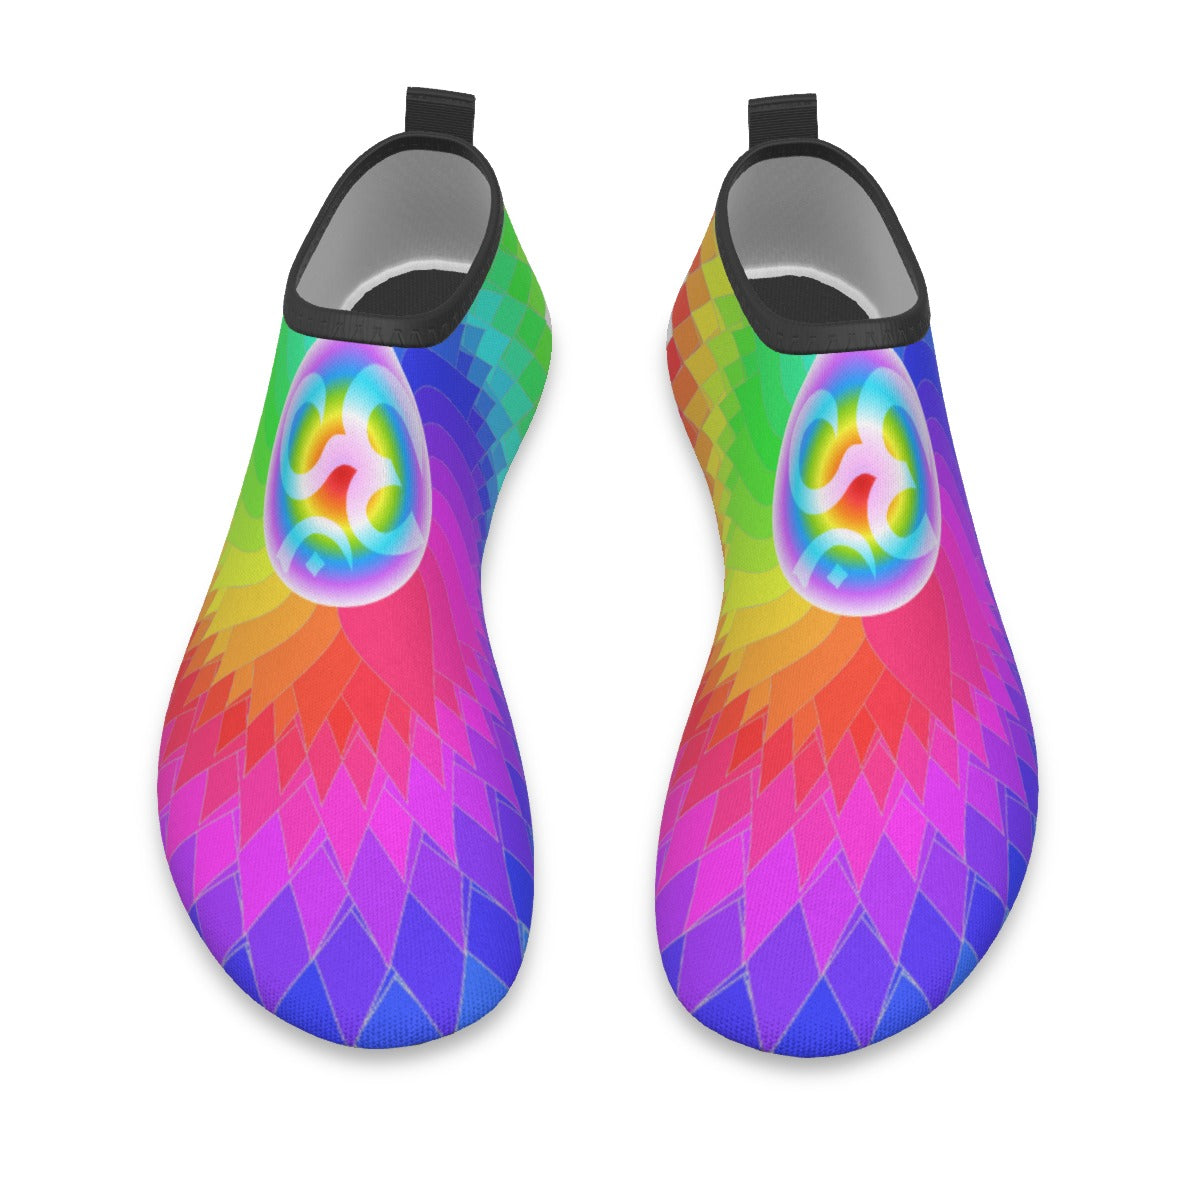 Shoes for Studio Pilates - 7 Chakra Unisex Yoga and Zen Breathable Shoes - Lightweight and Felixaeble Yoga Shoes for All Ages - Personal Hour for Yoga and Meditations 